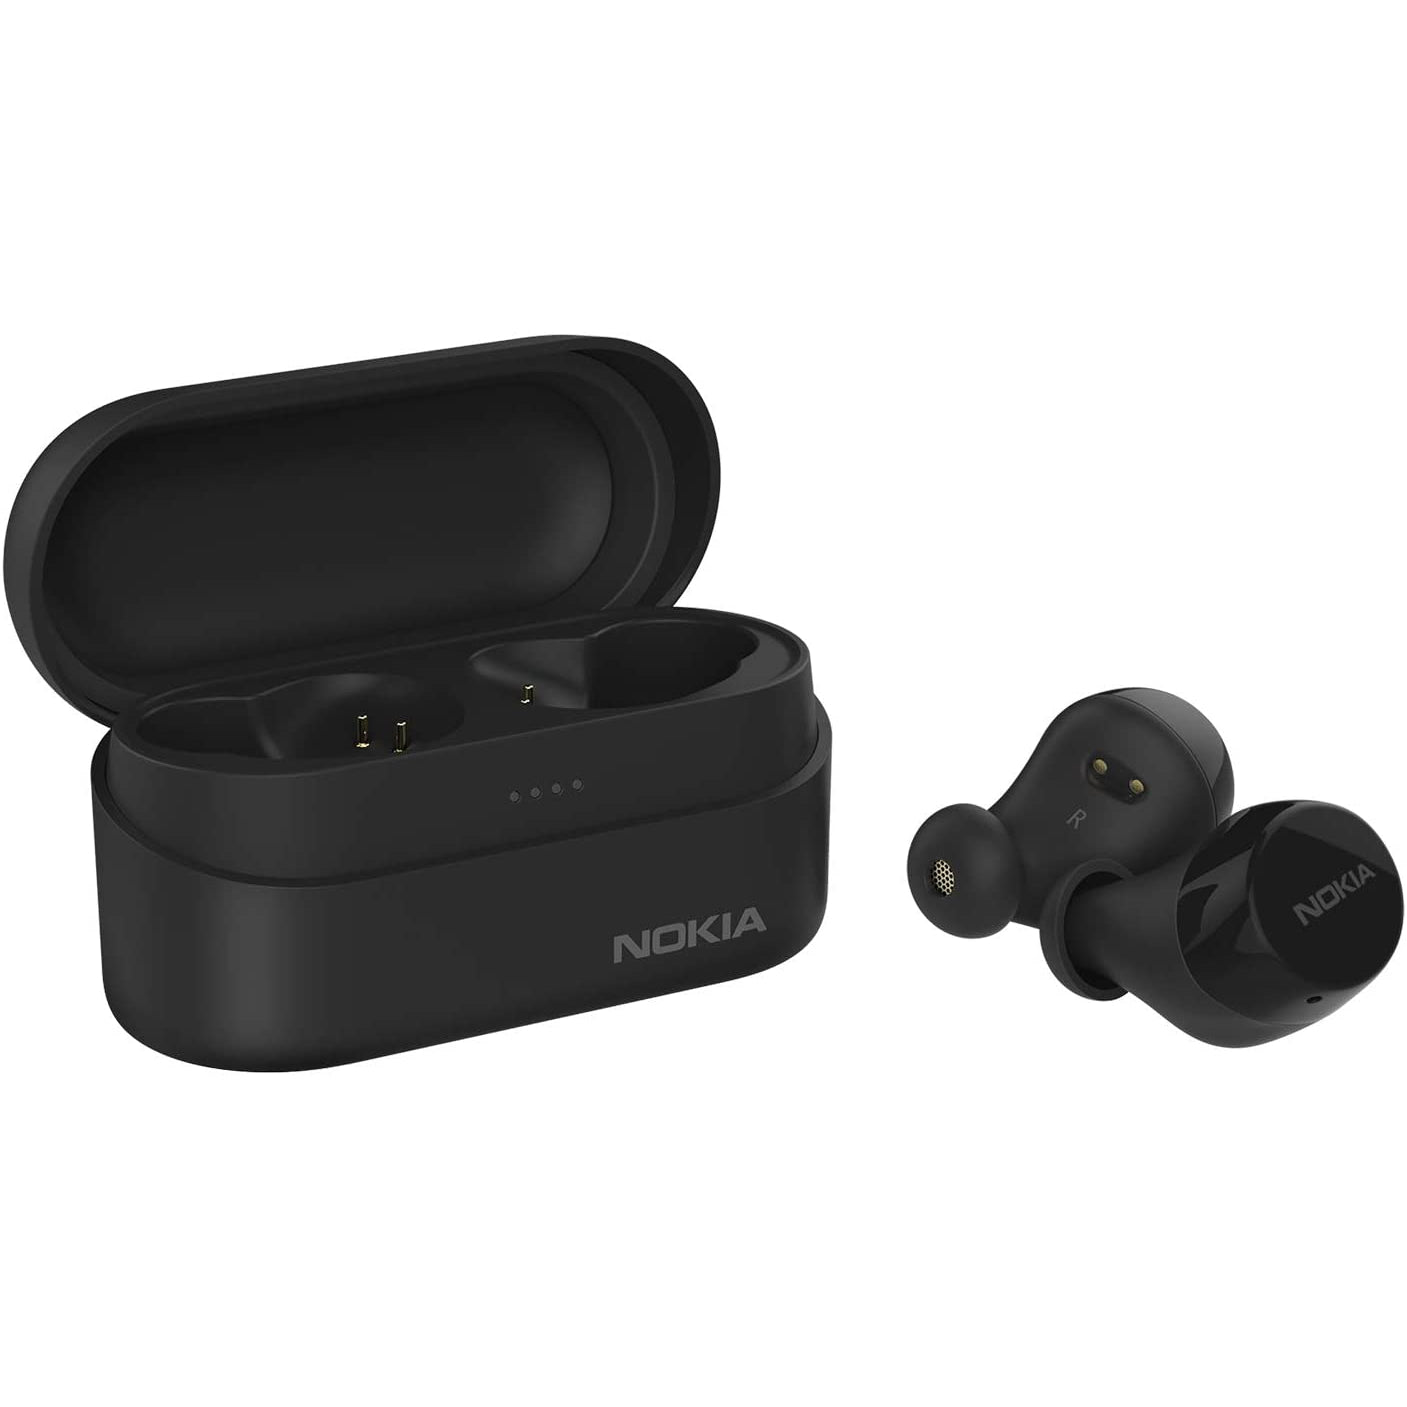 Nokia Power BH-605 Wireless Earbuds with Bluetooth, Black - Refurbished Excellent